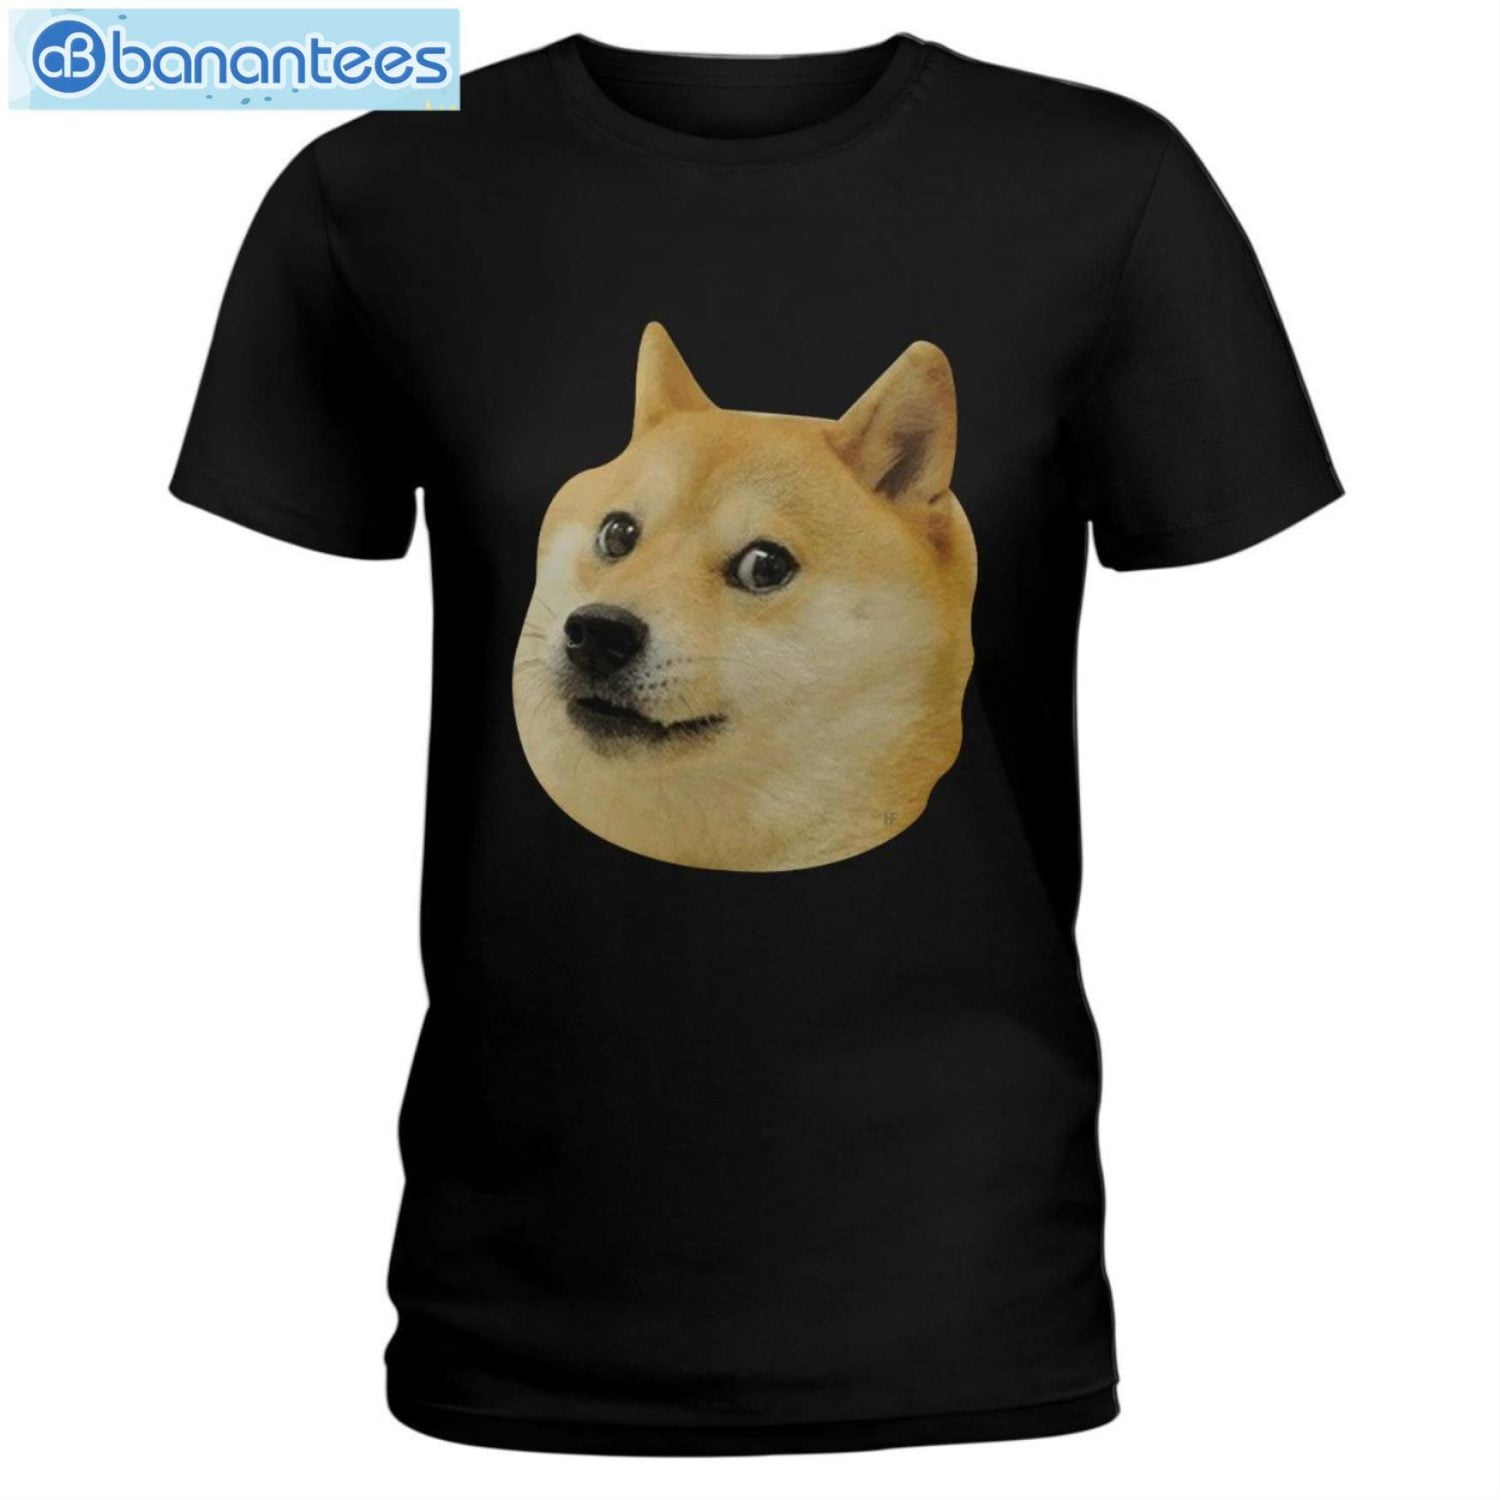 Funny Doge Face Dogecoin T-Shirt Long Sleeve Tee Product Photo 1 Product photo 1